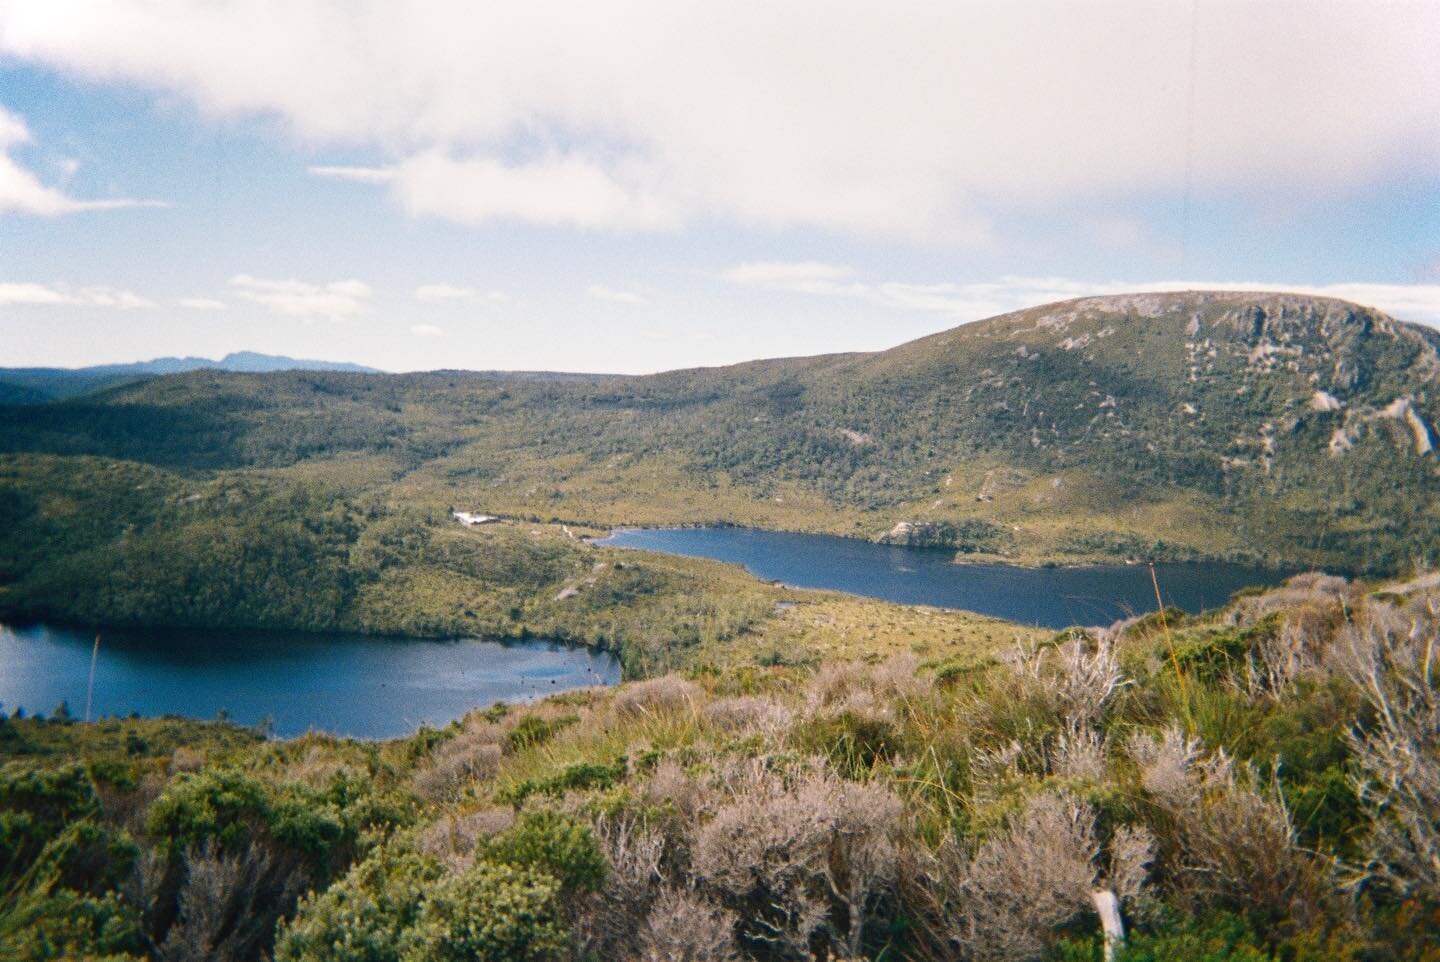 Hiking the Overland Track over Easter, on film 🎞